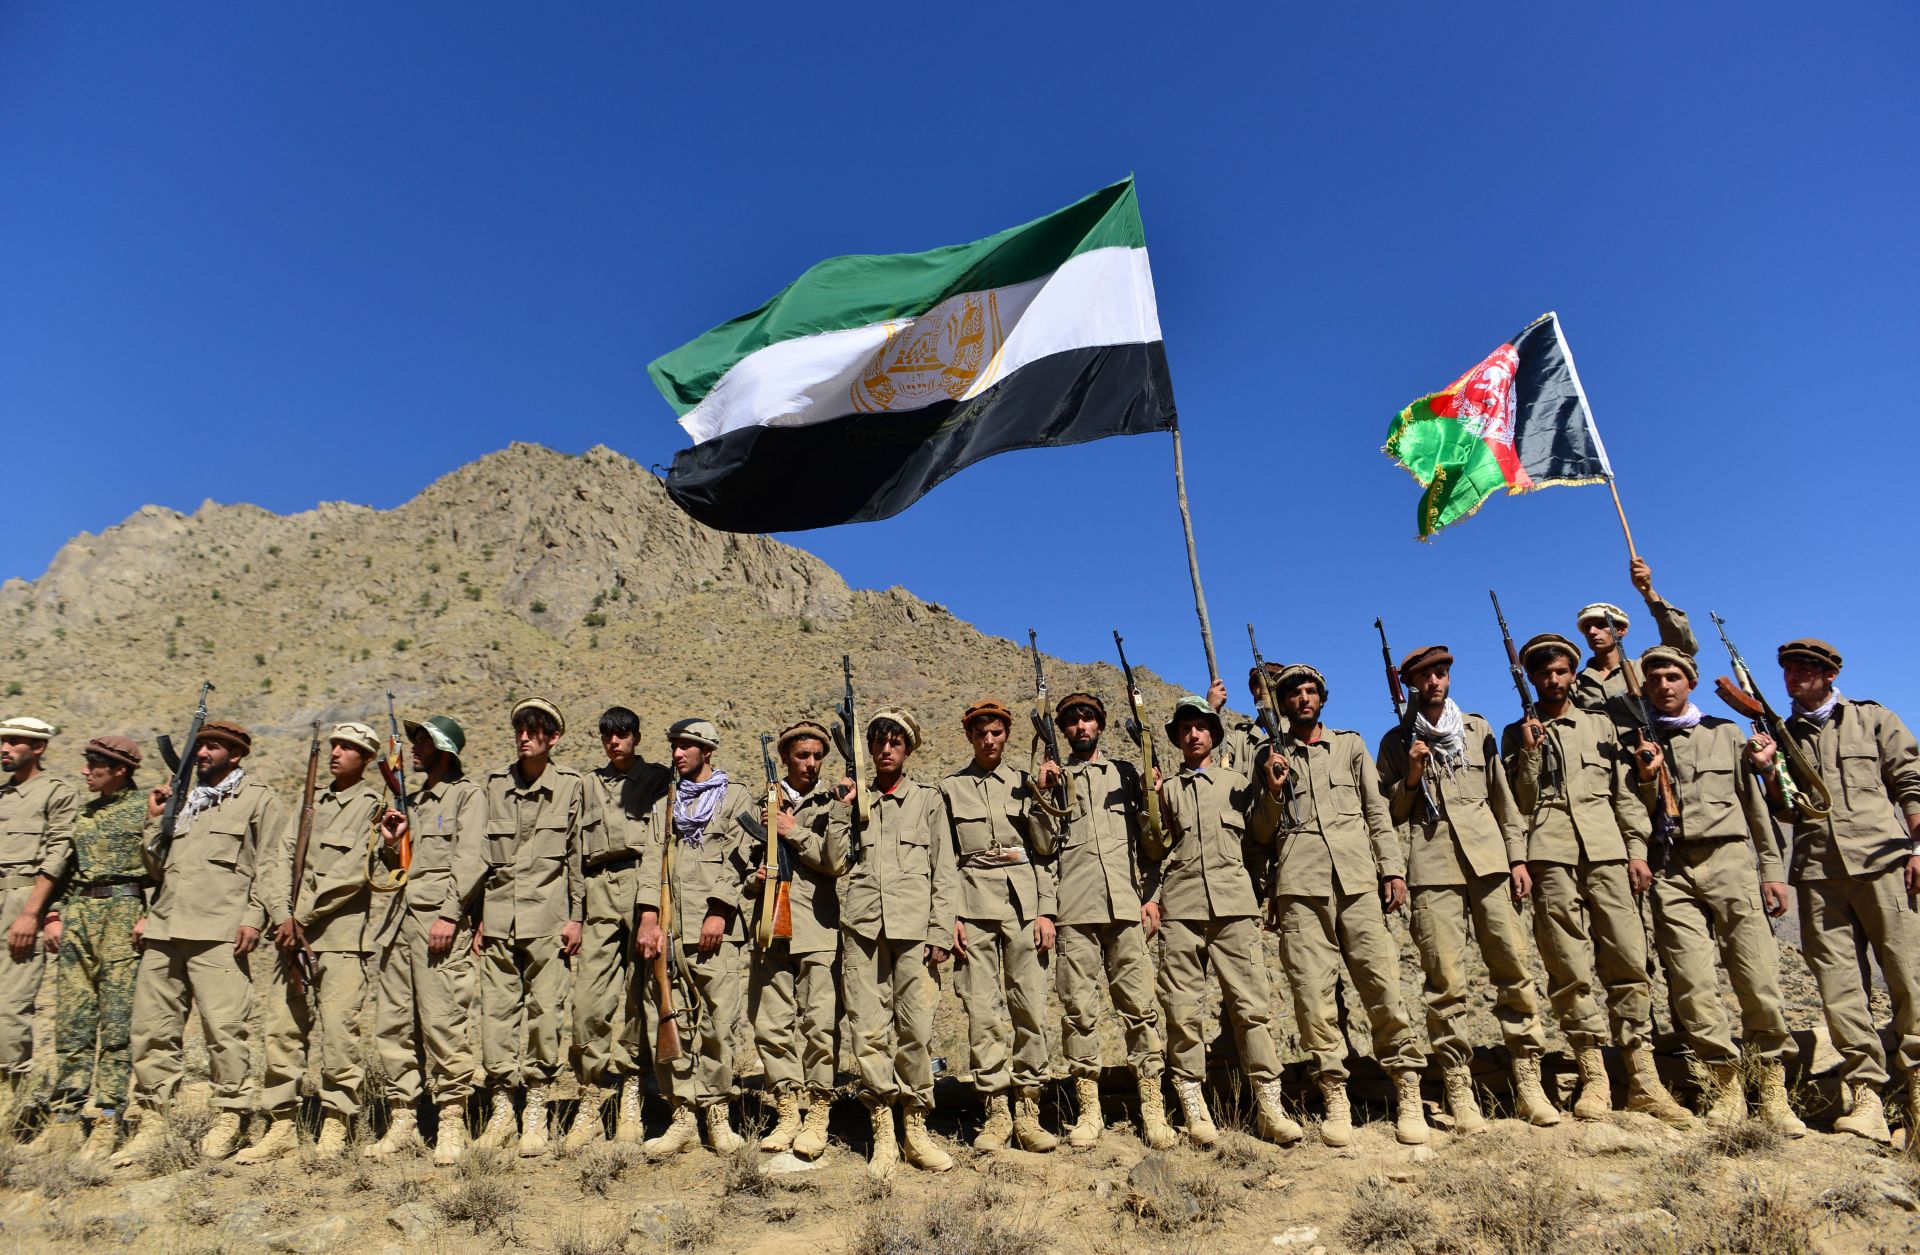 Anti-Taliban resistance forces take part in a military training exercise in Afghanistan’s Panjshir province on Sept. 2, 2021. 